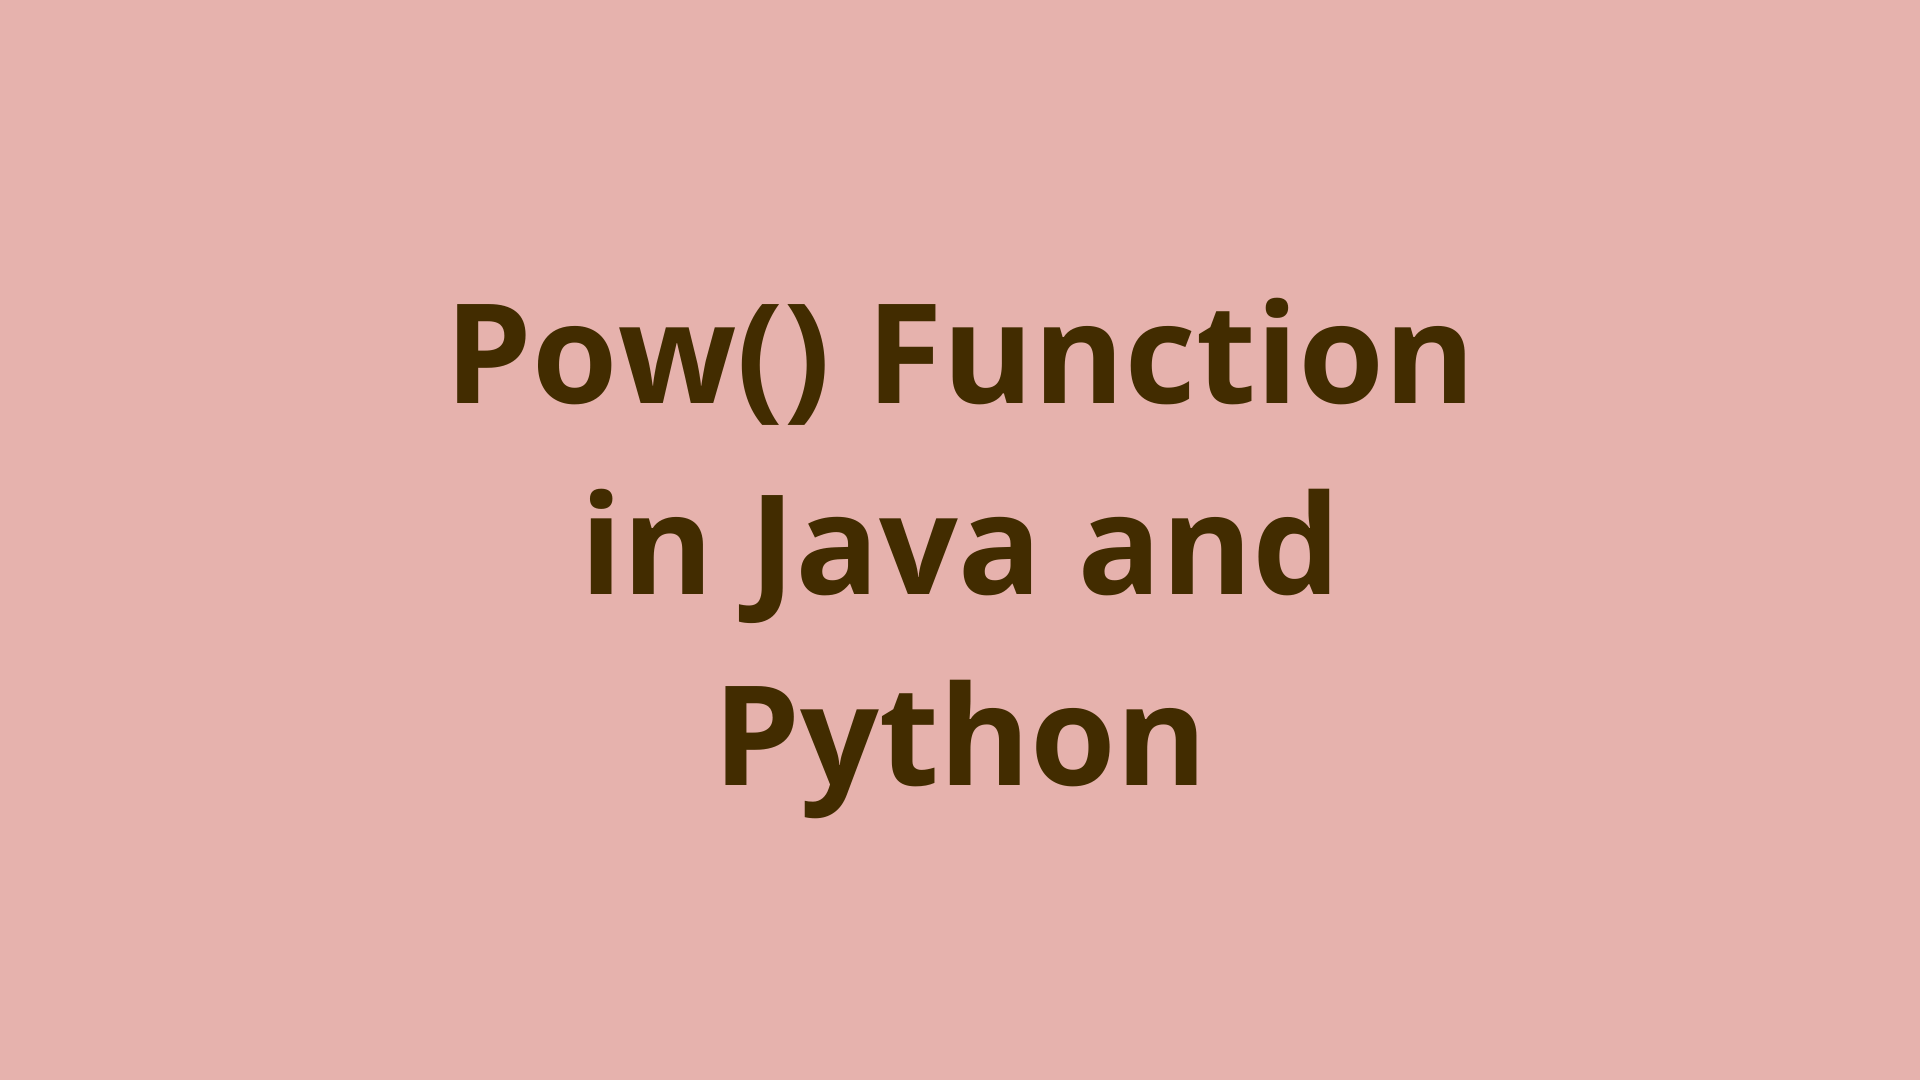 Image of Pow() Function in Java and Python